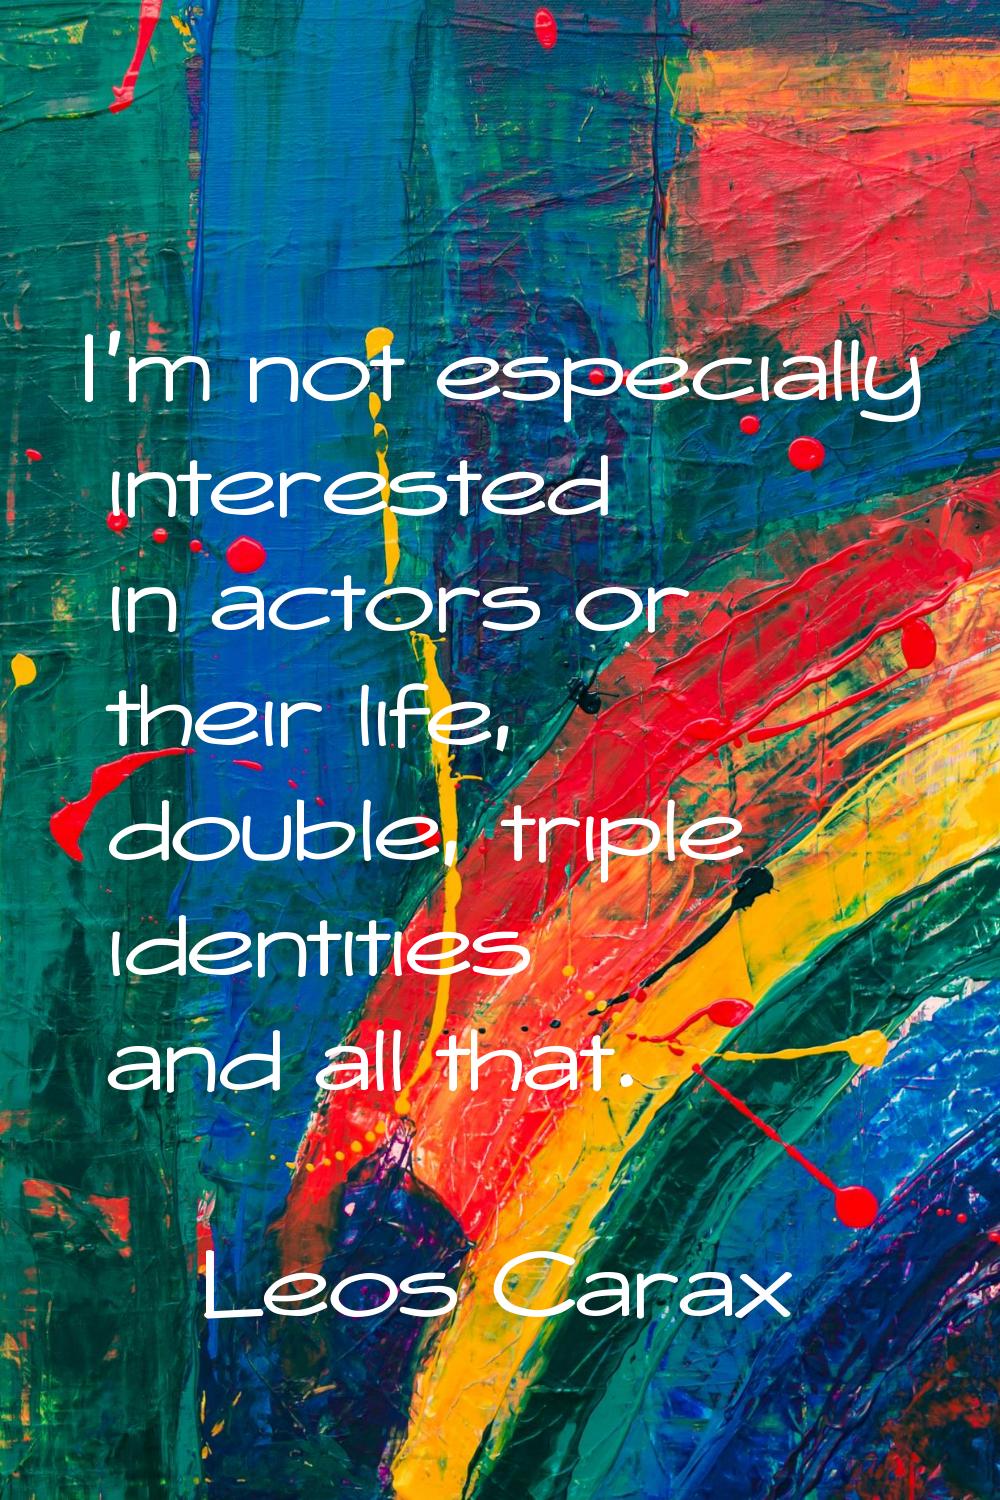 I'm not especially interested in actors or their life, double, triple identities and all that.